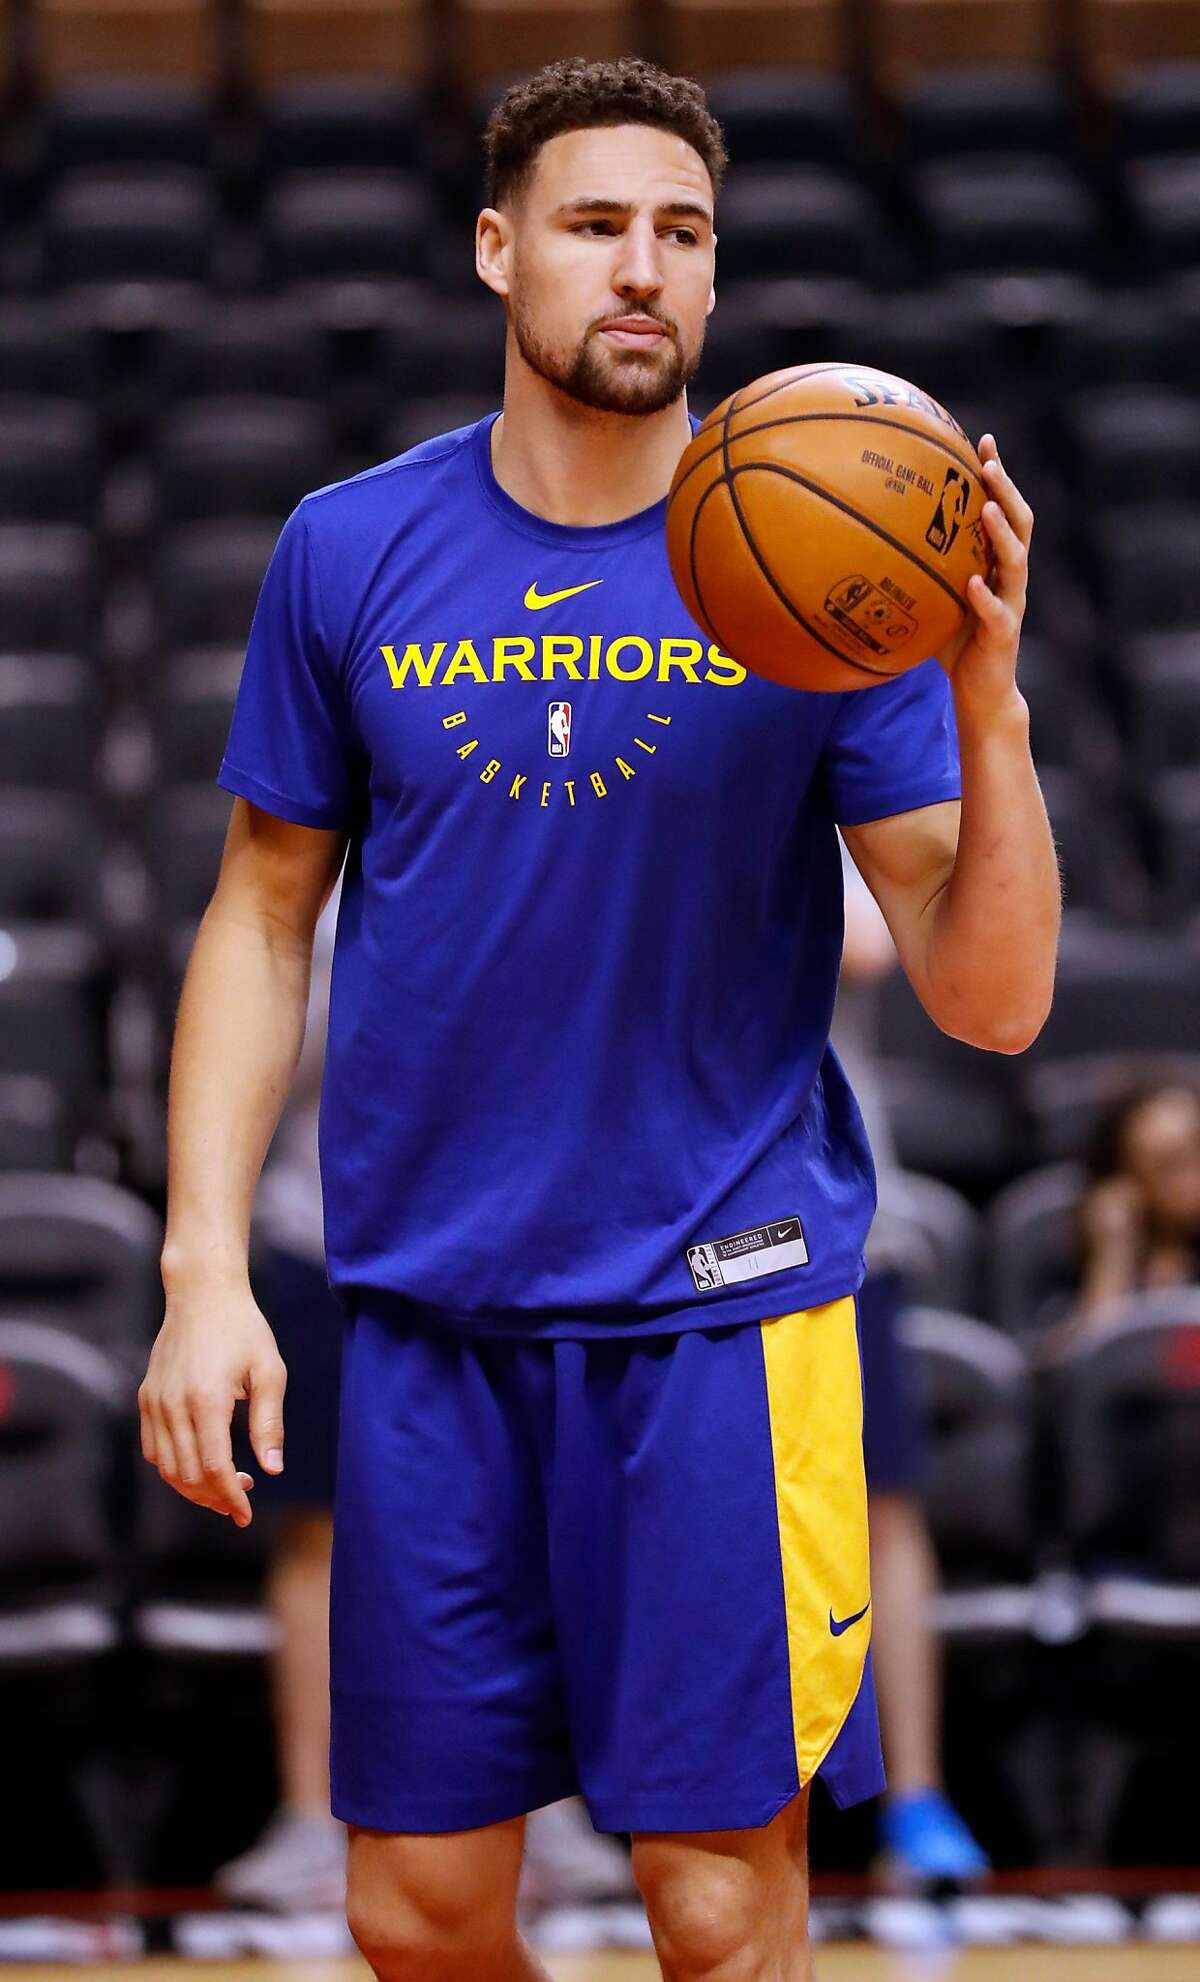 Golden State Warriors' Klay Thompson during practice day in advance of NBA Finals' Game 5 at Scotiabank Arena in Toronto, Ontario, on Sunday, June 9, 2019.